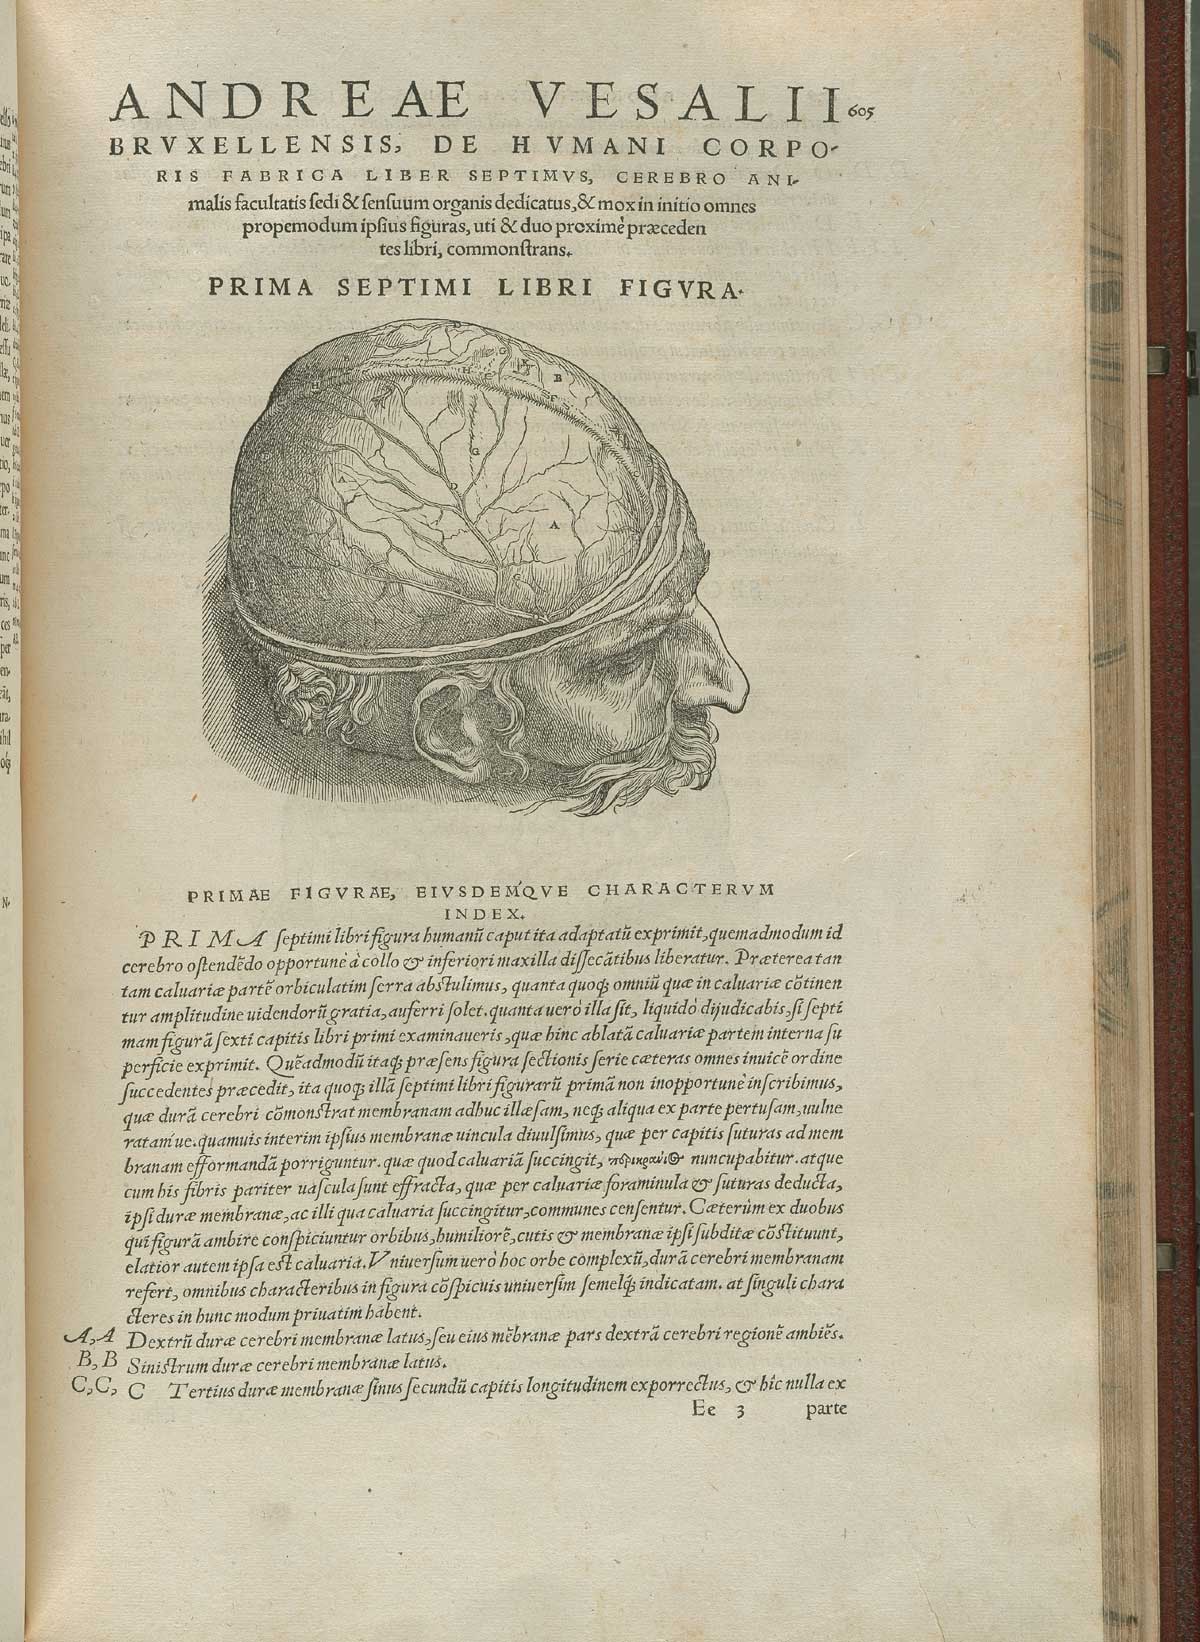 Page 605 of Andreas Vesalius' De corporis humani fabrica libri septem, featuring the illustrated woodcut of the head with the scalp exposed to show the duramater.